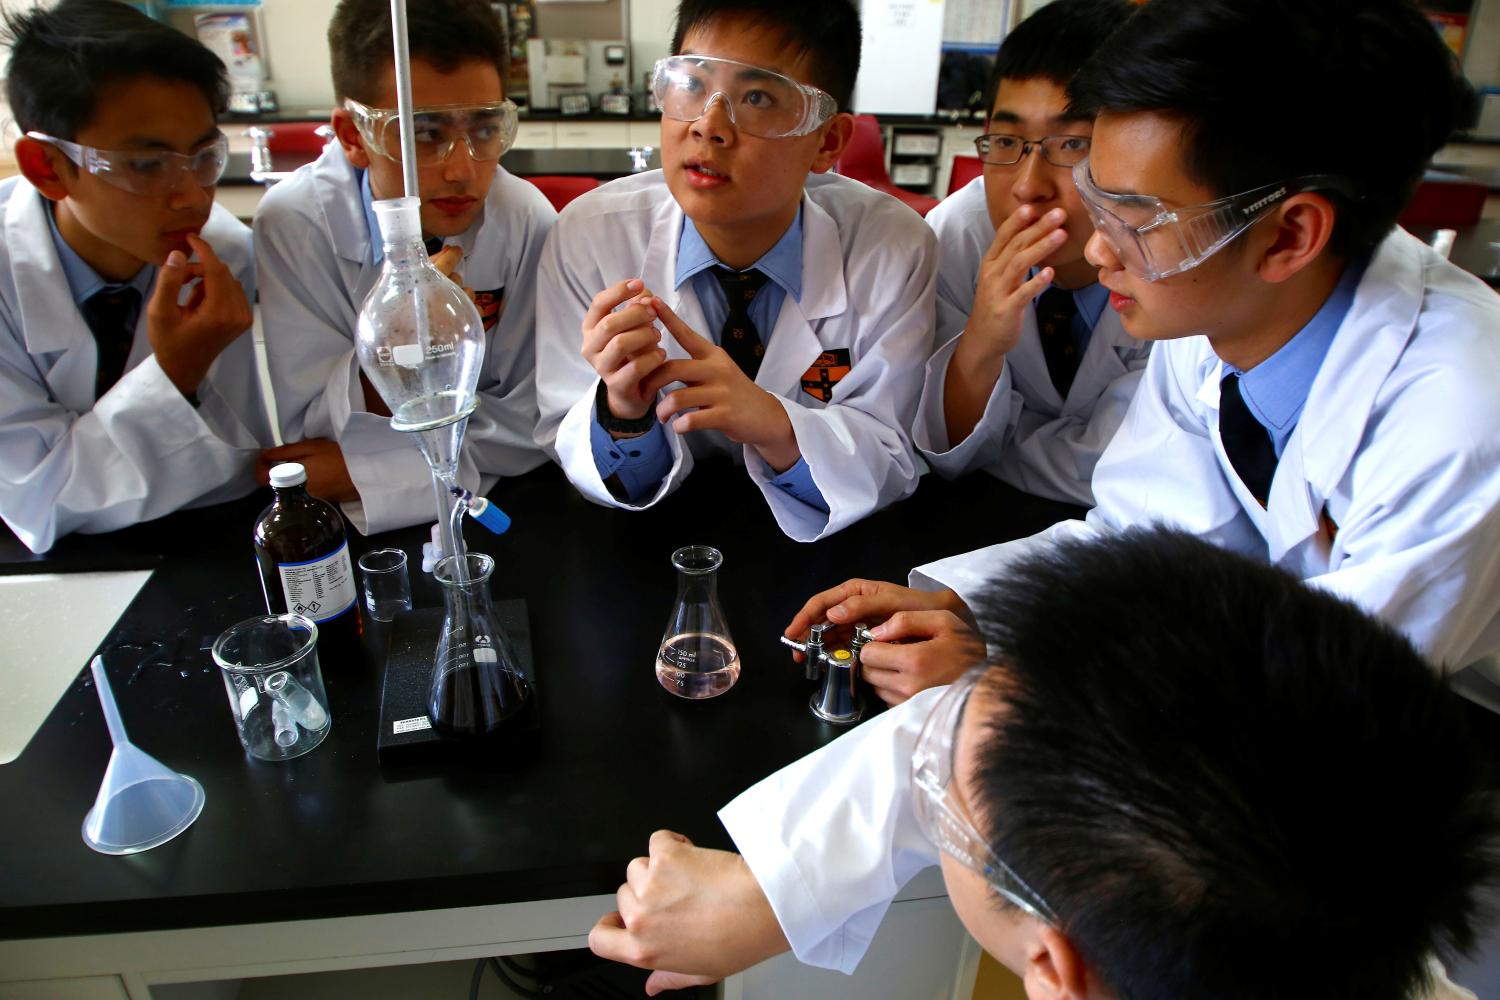 A group of chemistry students